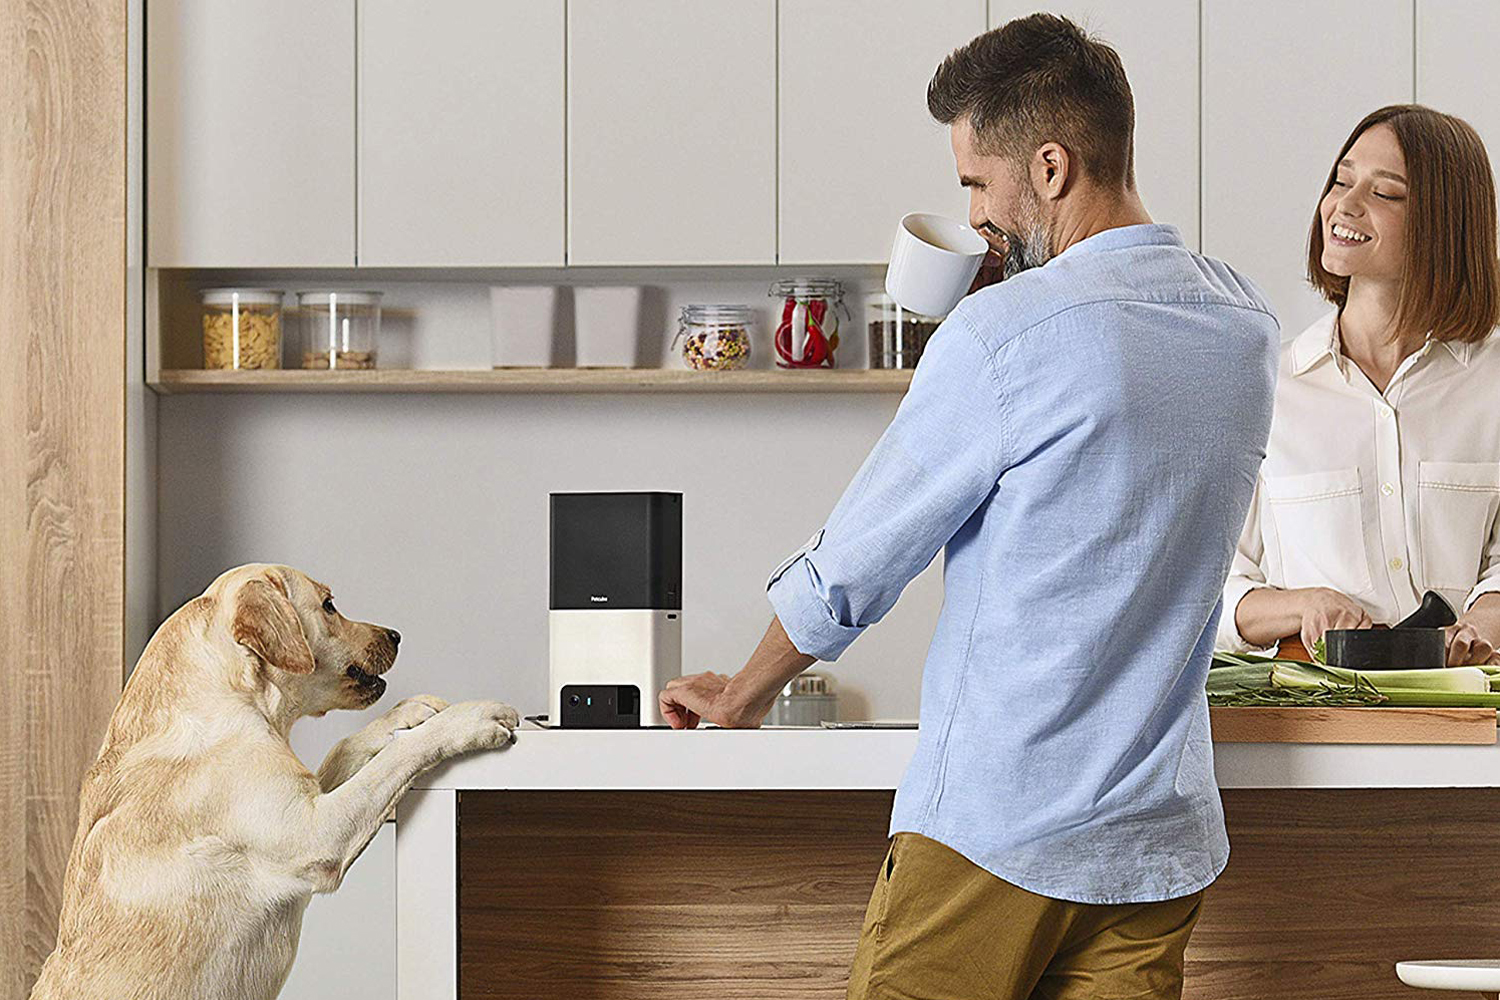 These Pet Tech Products Will Keep Your Dog Happy and Busy While